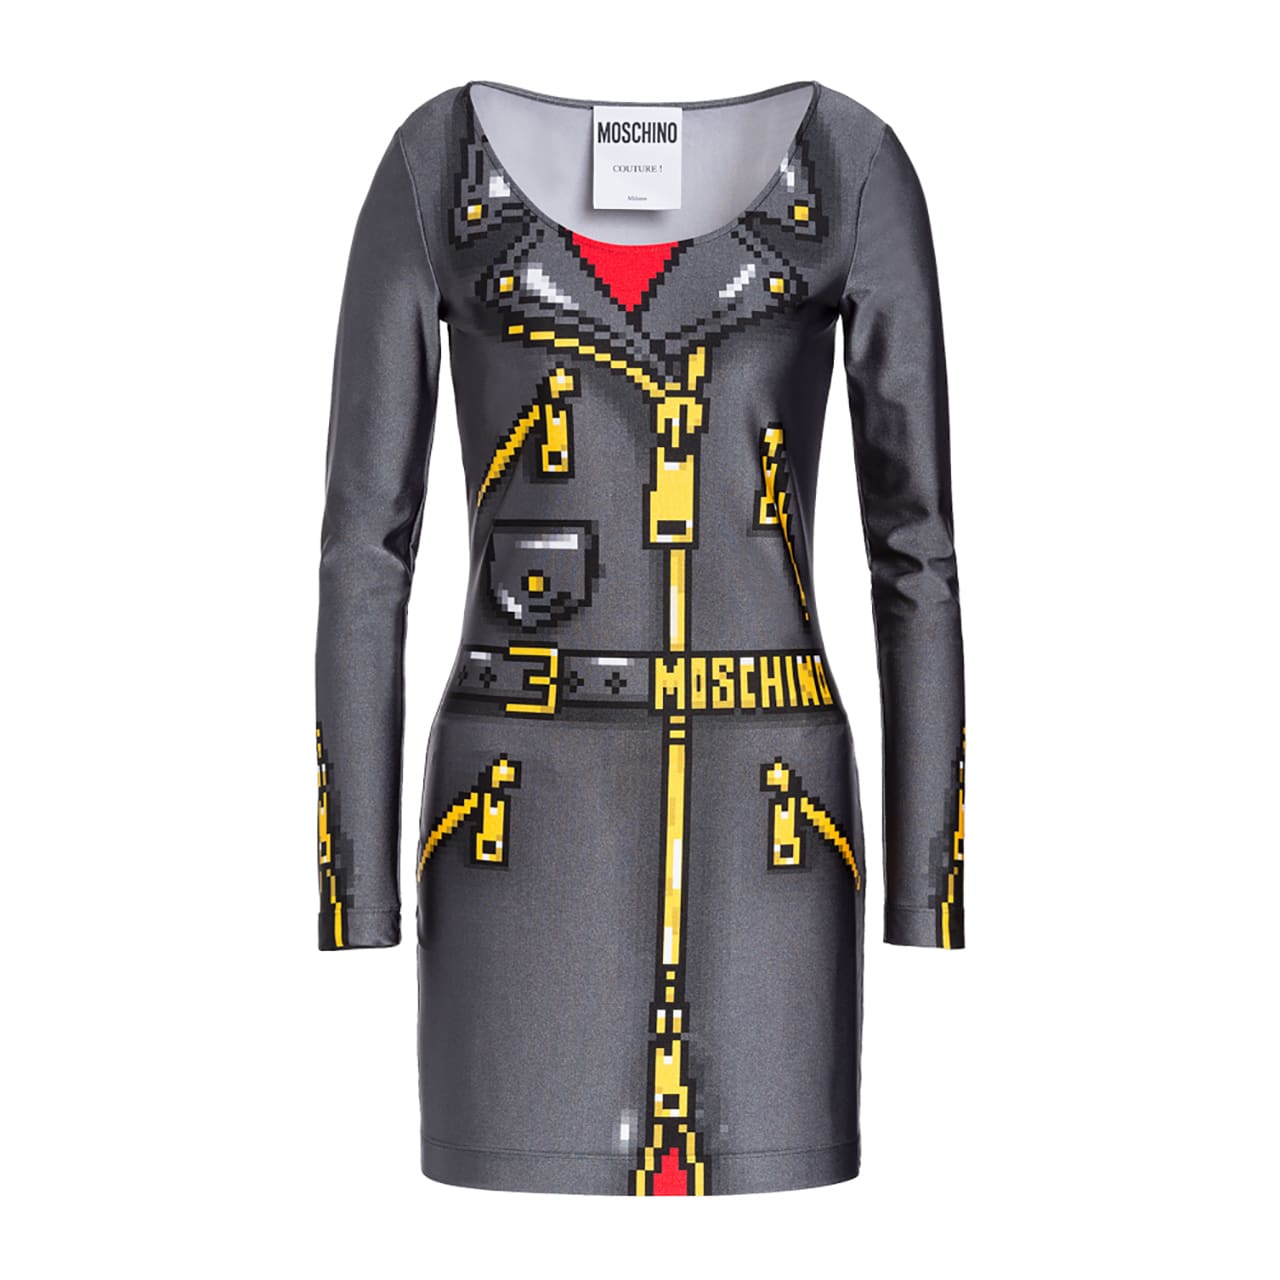 The Sims x Moschino: Fashion Collaboration Unveiled